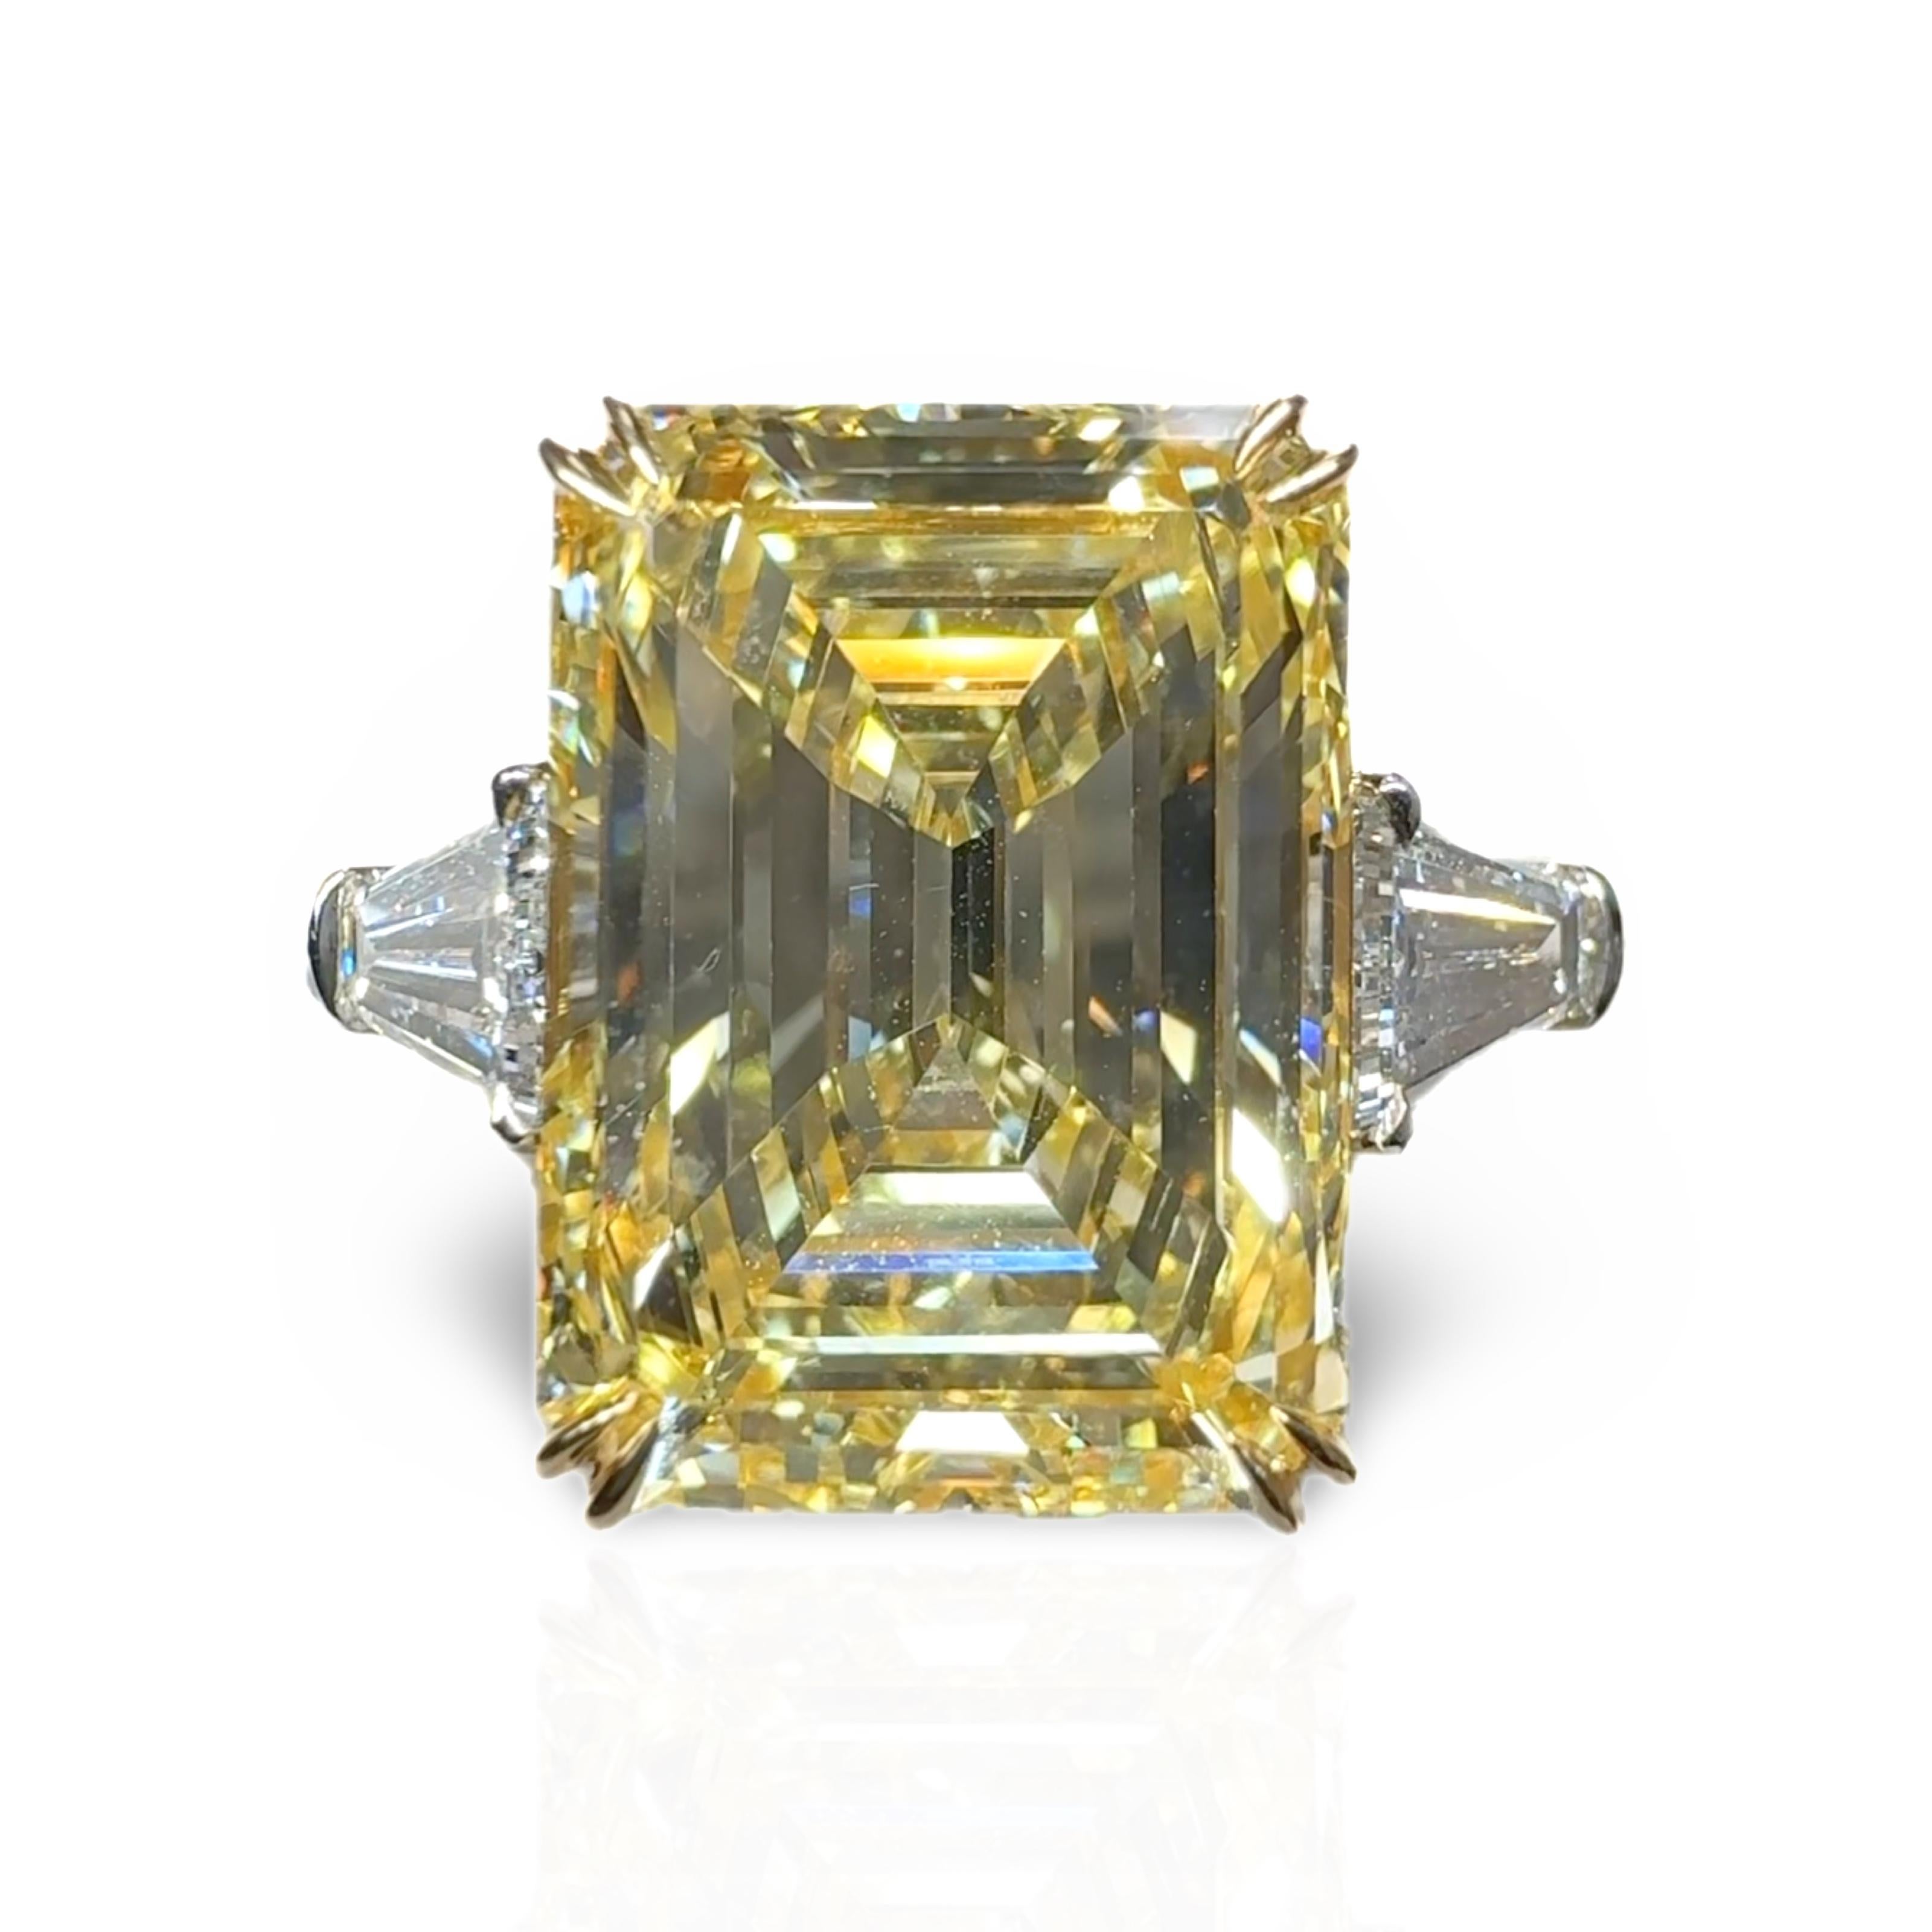 A statement Three Stone Ring showcasing an impeccably cut Natural Fancy Yellow Emerald Cut diamond. 
Emerald Cuts are one of the rarest cuts amongst Fancy Color Diamonds, and they are even more unusual to see with length to with ratios of over 1.35